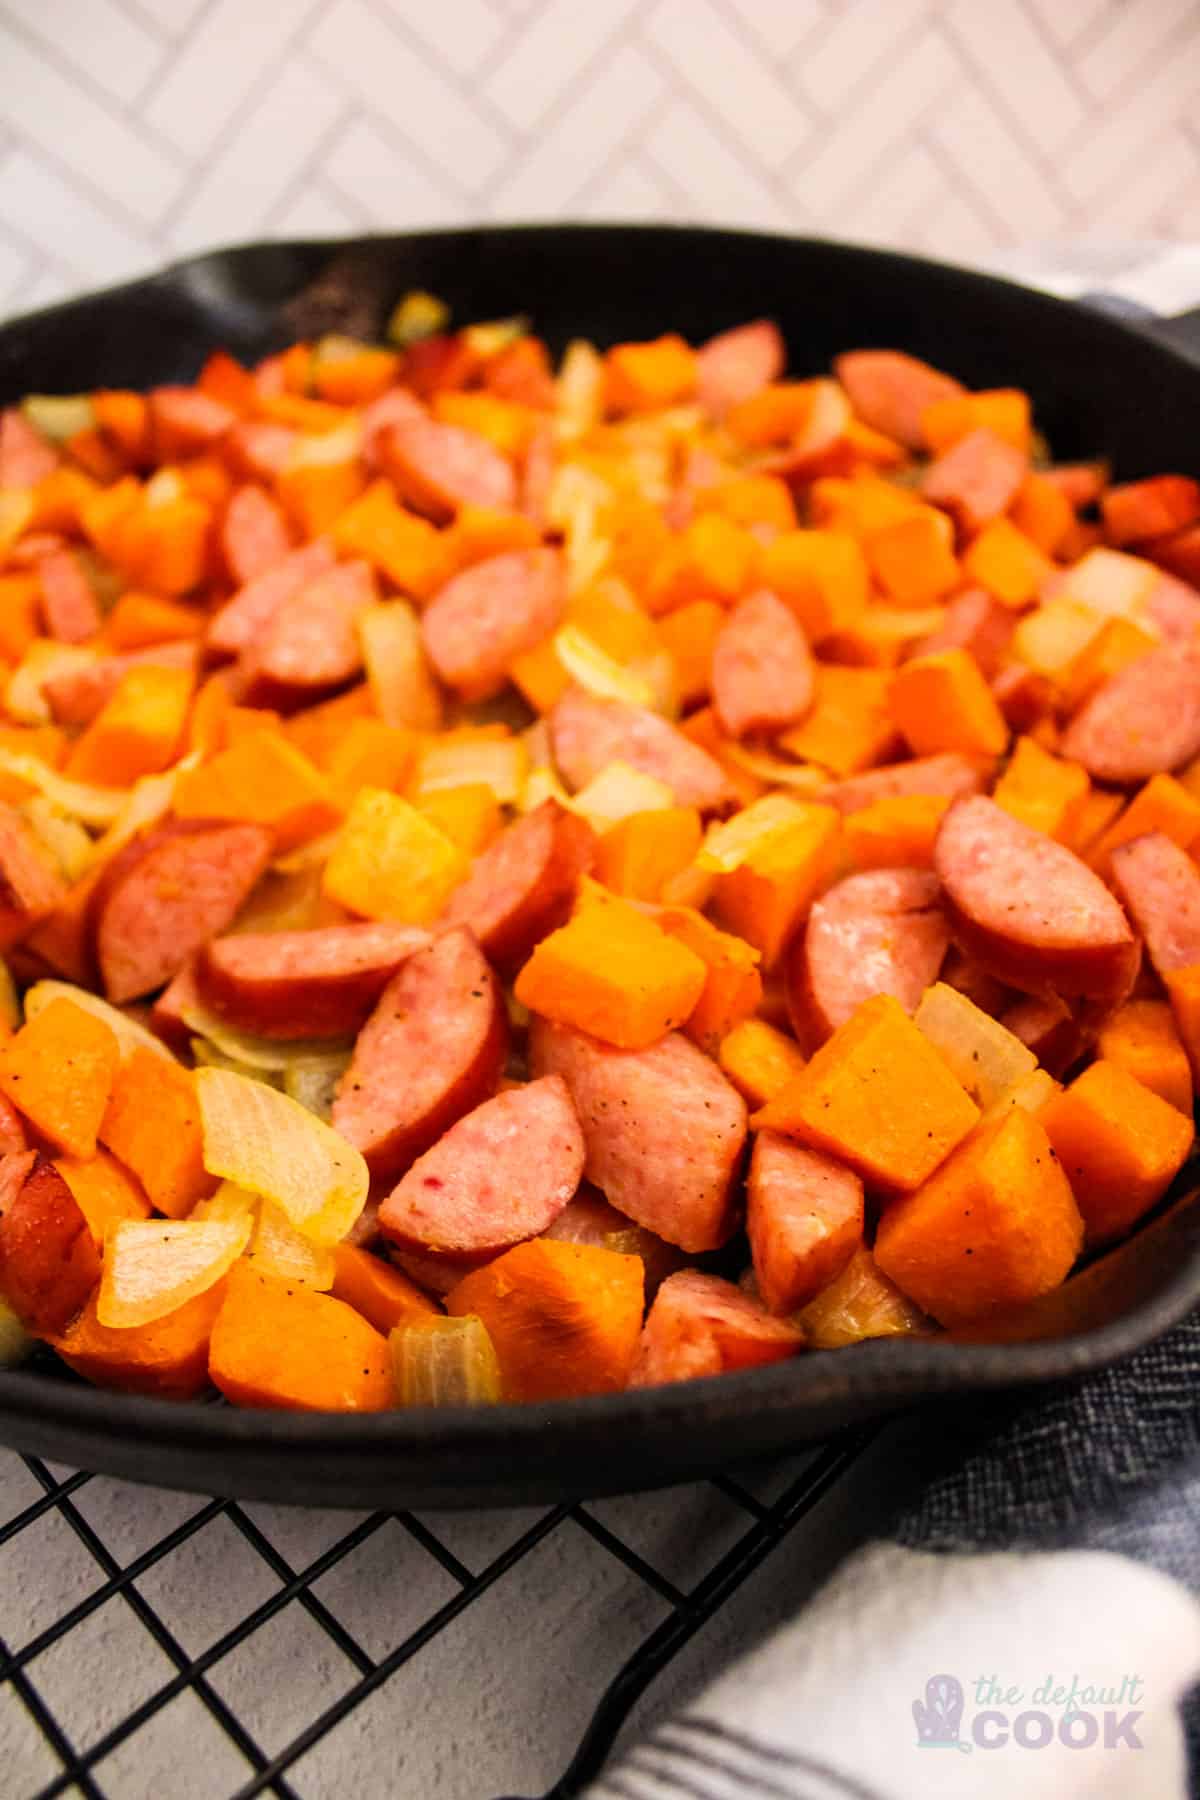 Close up of an iron skillet filled with cooked sweet potatoes, smoked sausage, and onions.